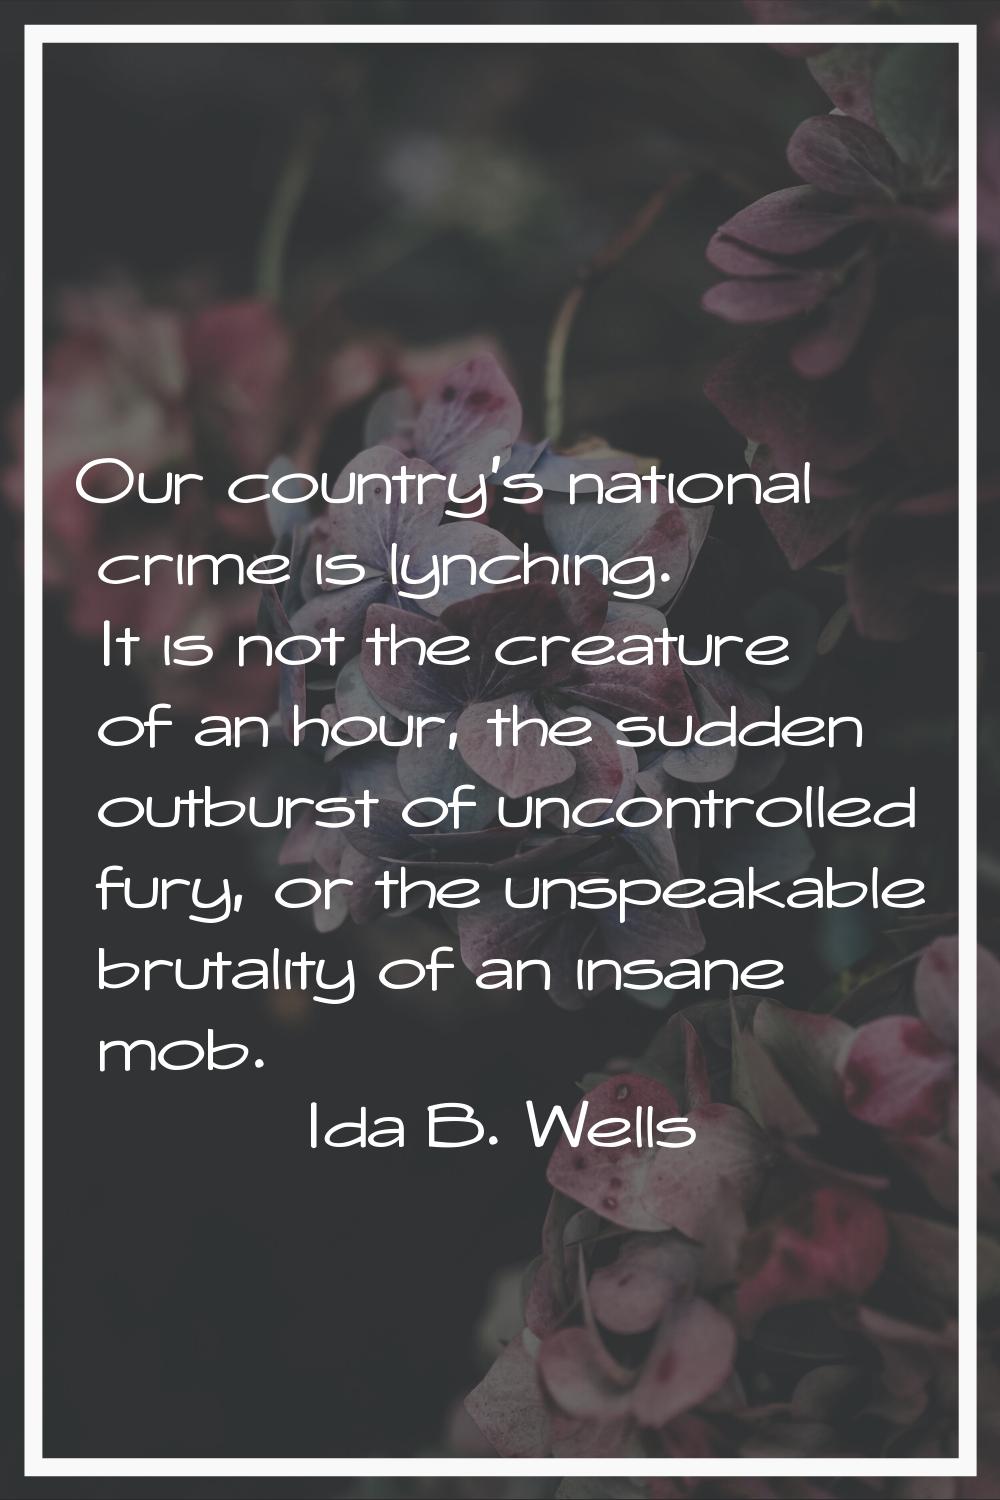 Our country's national crime is lynching. It is not the creature of an hour, the sudden outburst of